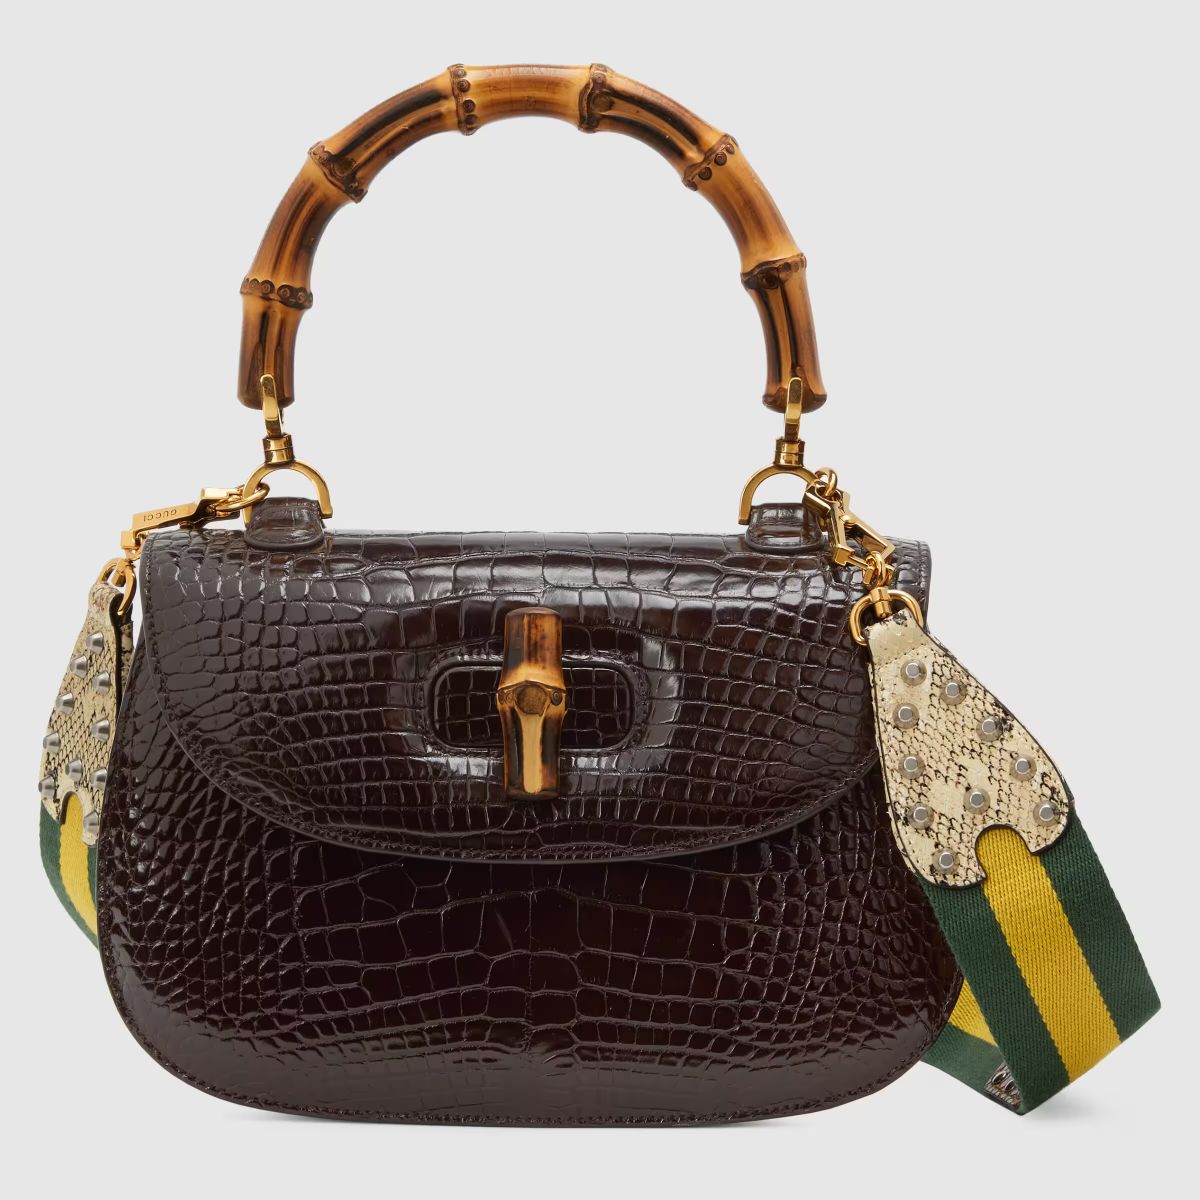 Gucci Bamboo 1947 Bag: Meet The Newest Gucci Bag & Learn Its